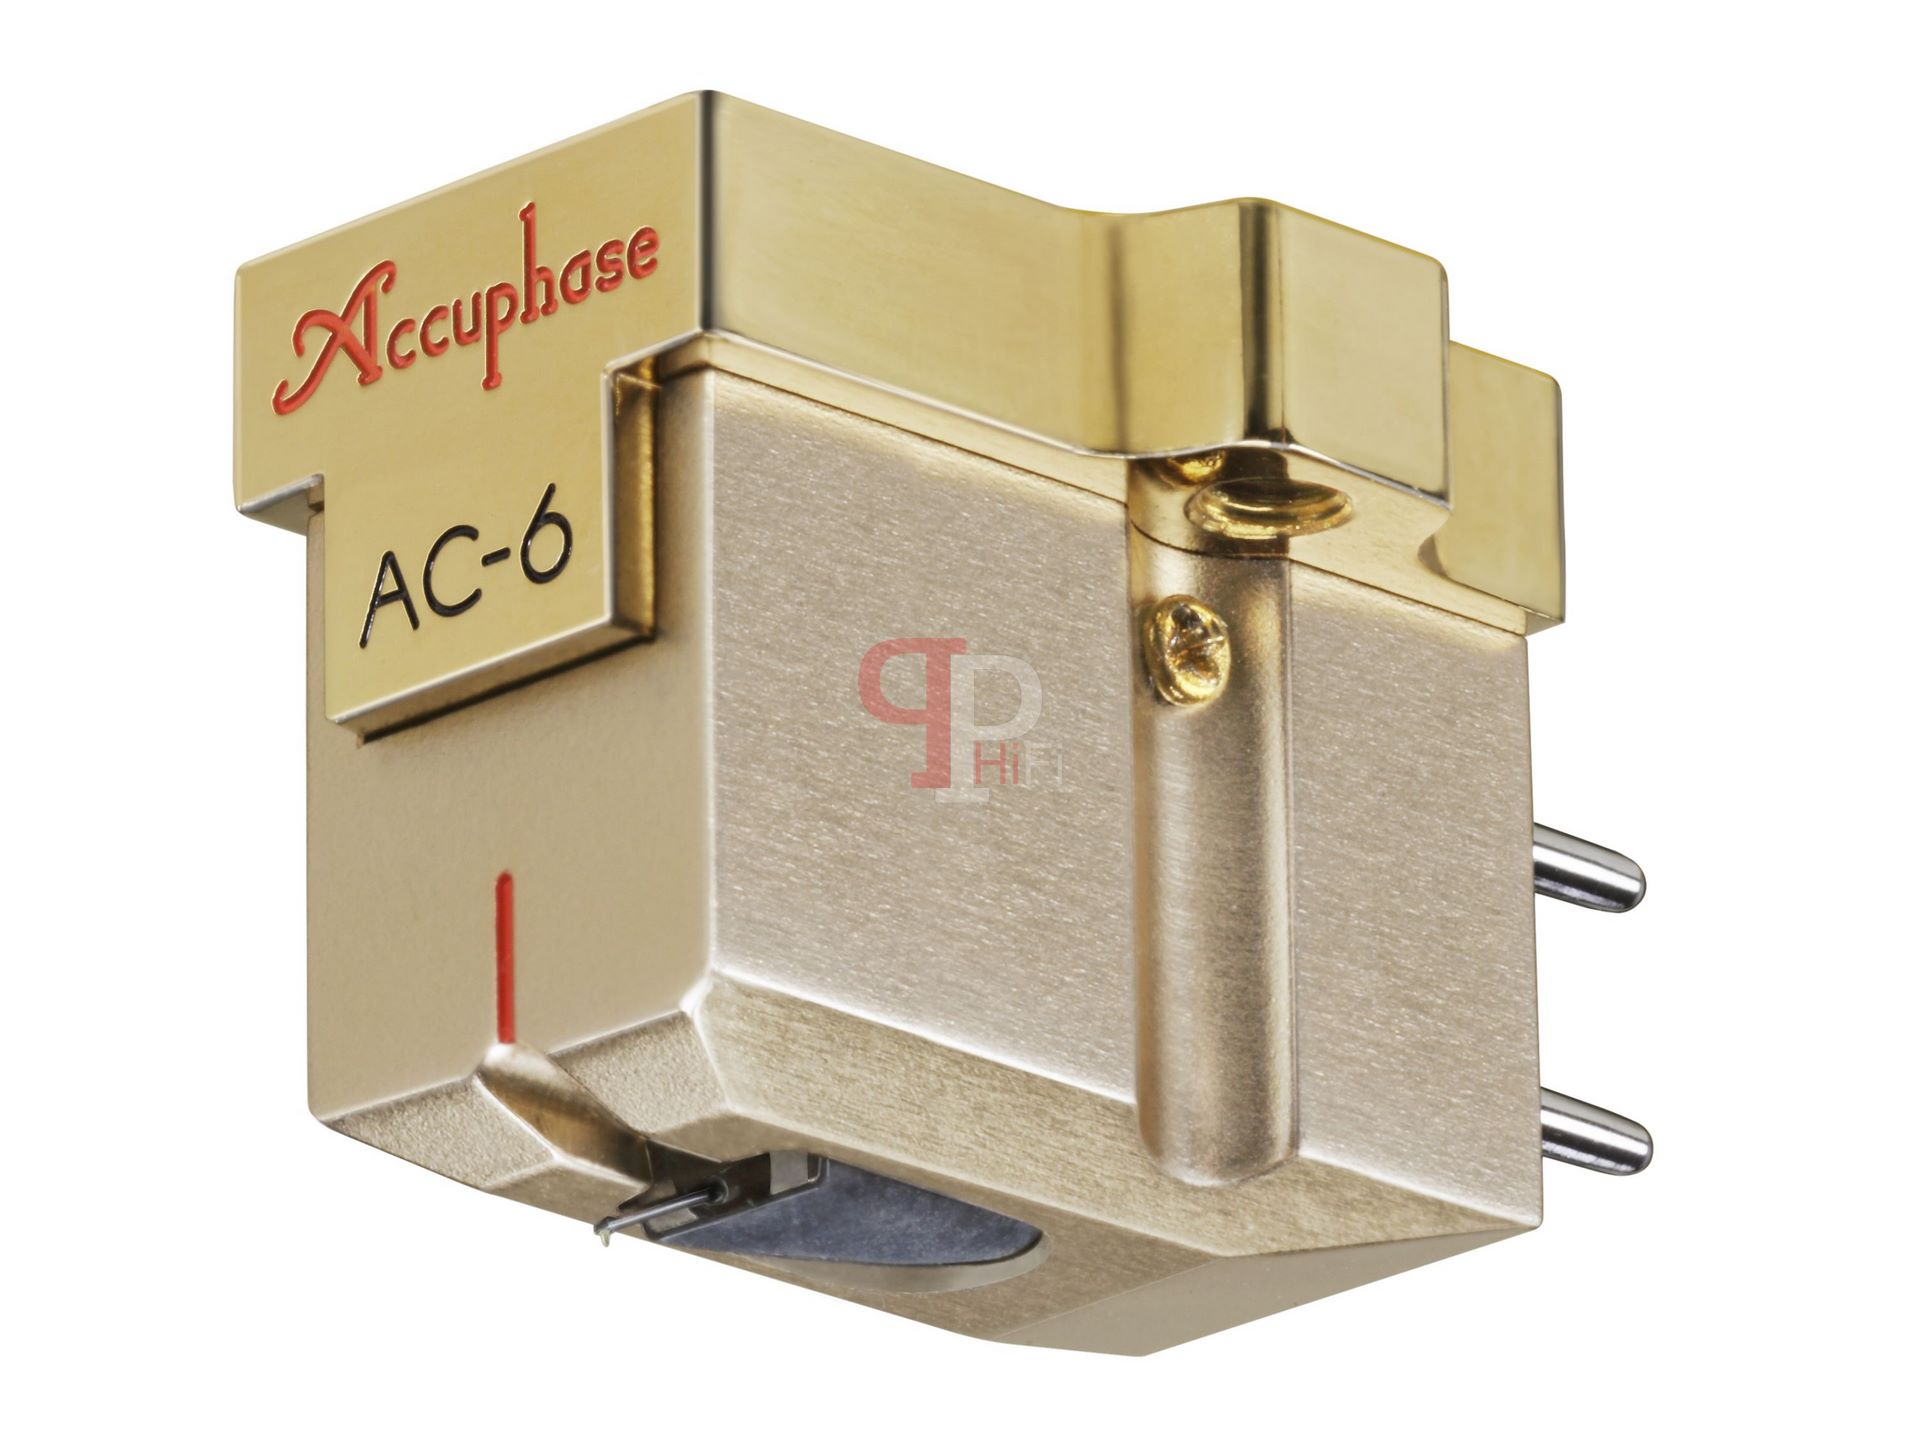 Accuphase AC-6 (MC)